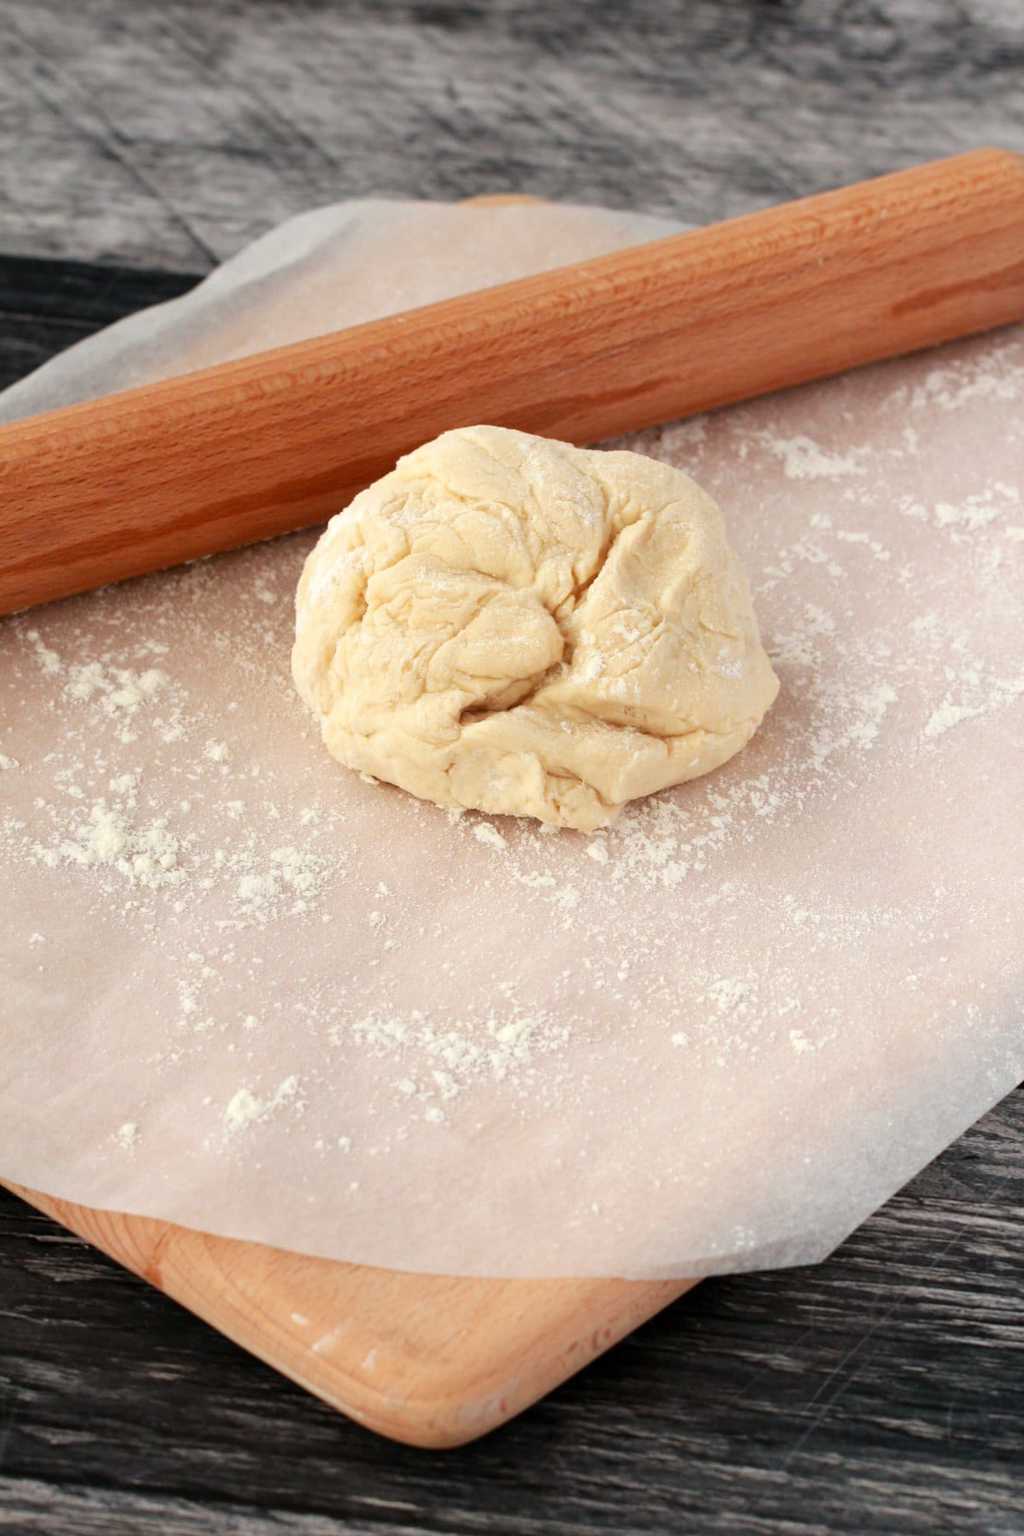 A ball of pizza dough on a piece of parchment paper with a rolling pin nearby